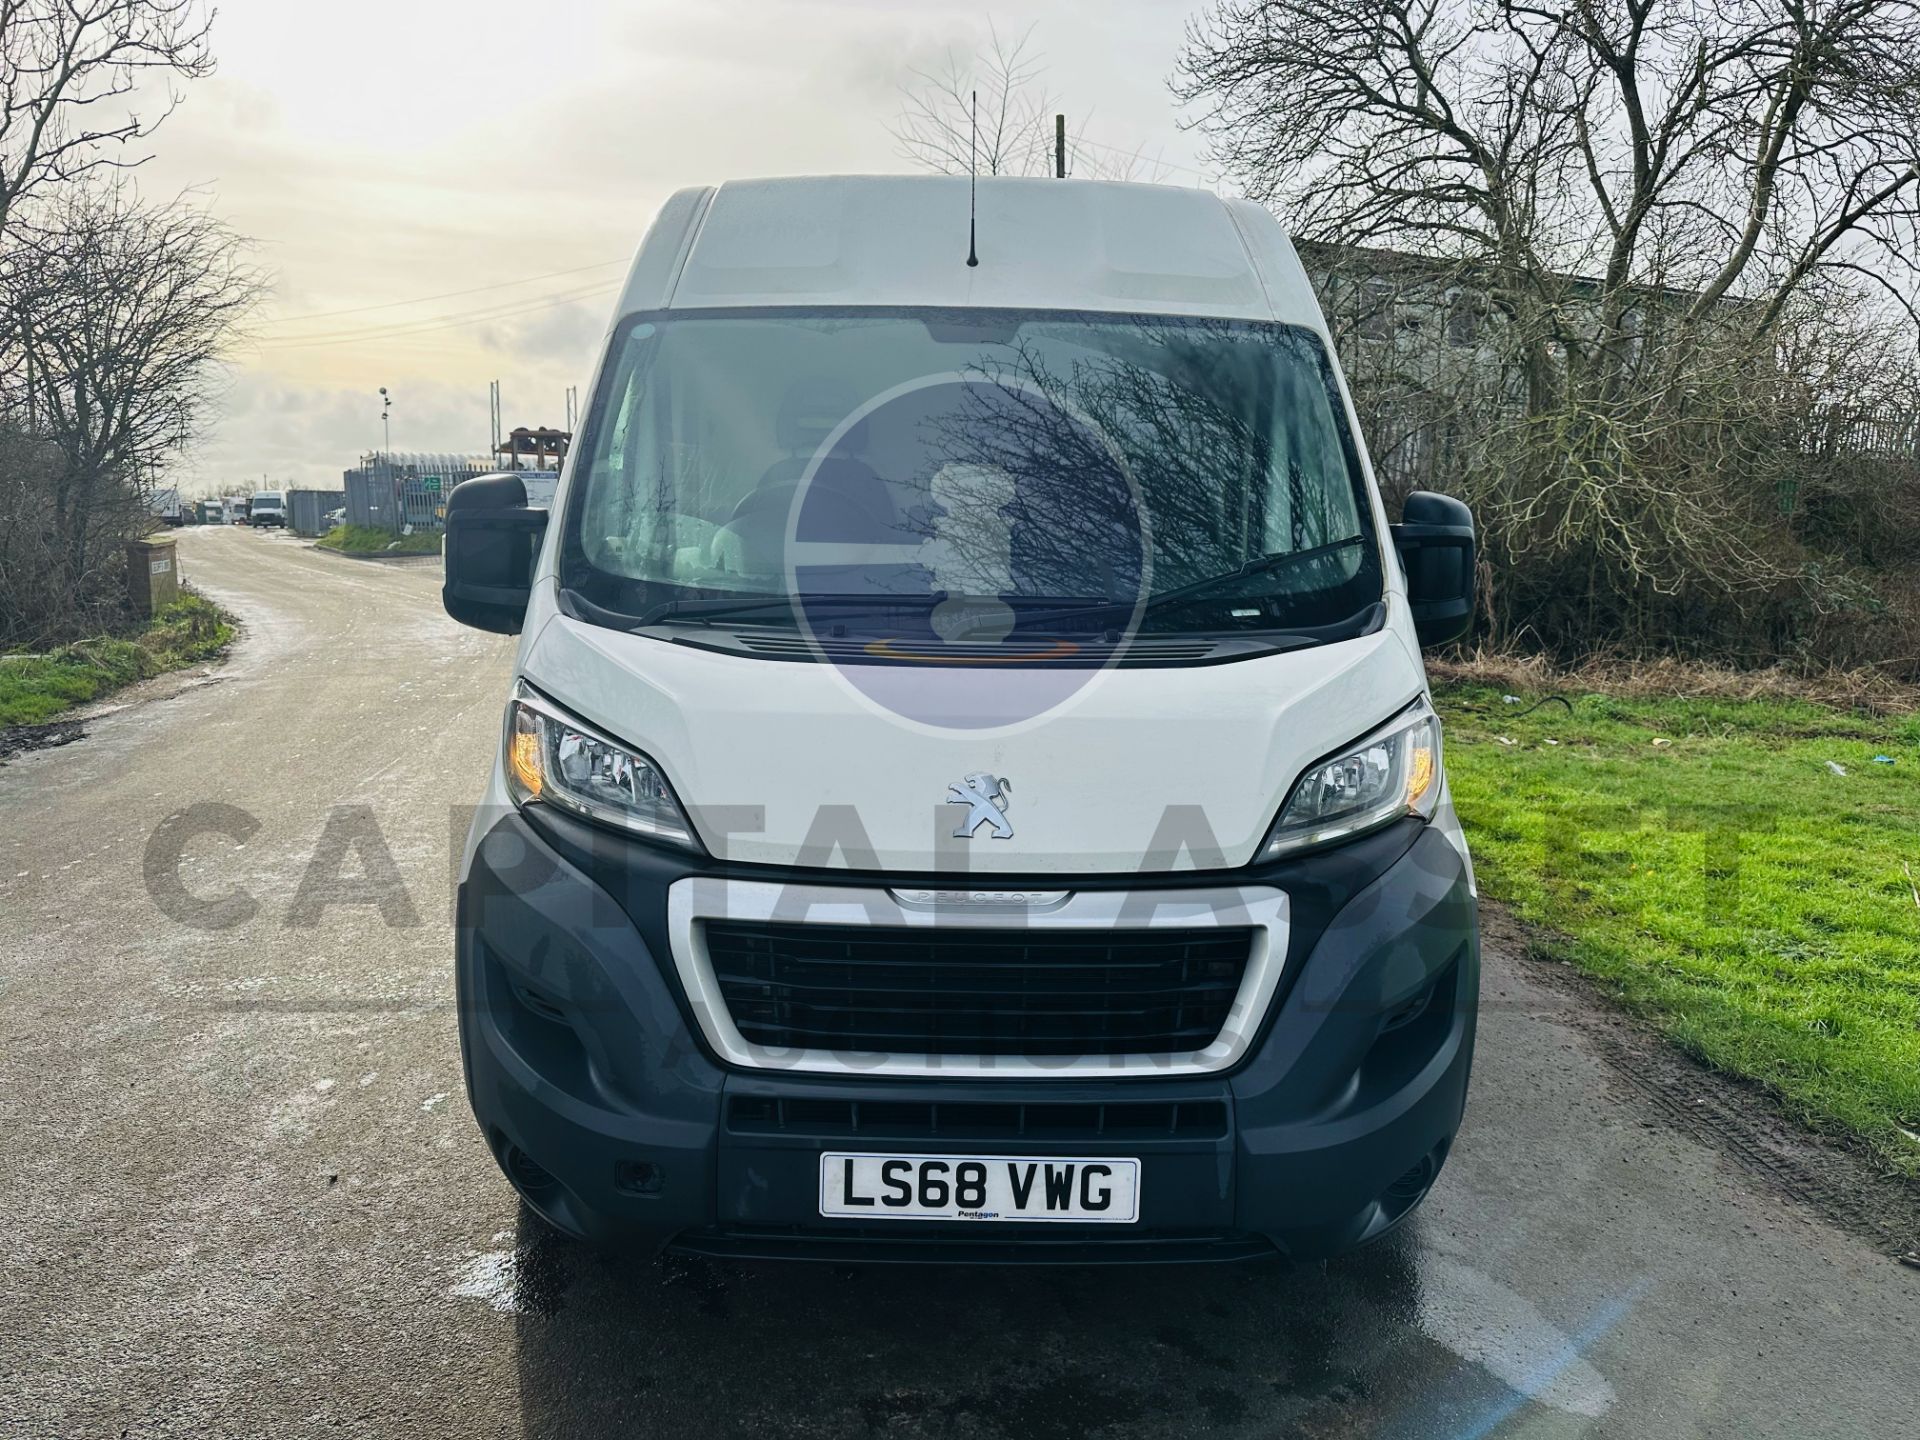 PEUGEOT BOXER *PROFESSIONAL* LWB HI-ROOF (2019 - EURO 6) 2.2 BLUE HDI - 6 SPEED *A/C* (1 OWNER) - Image 3 of 28